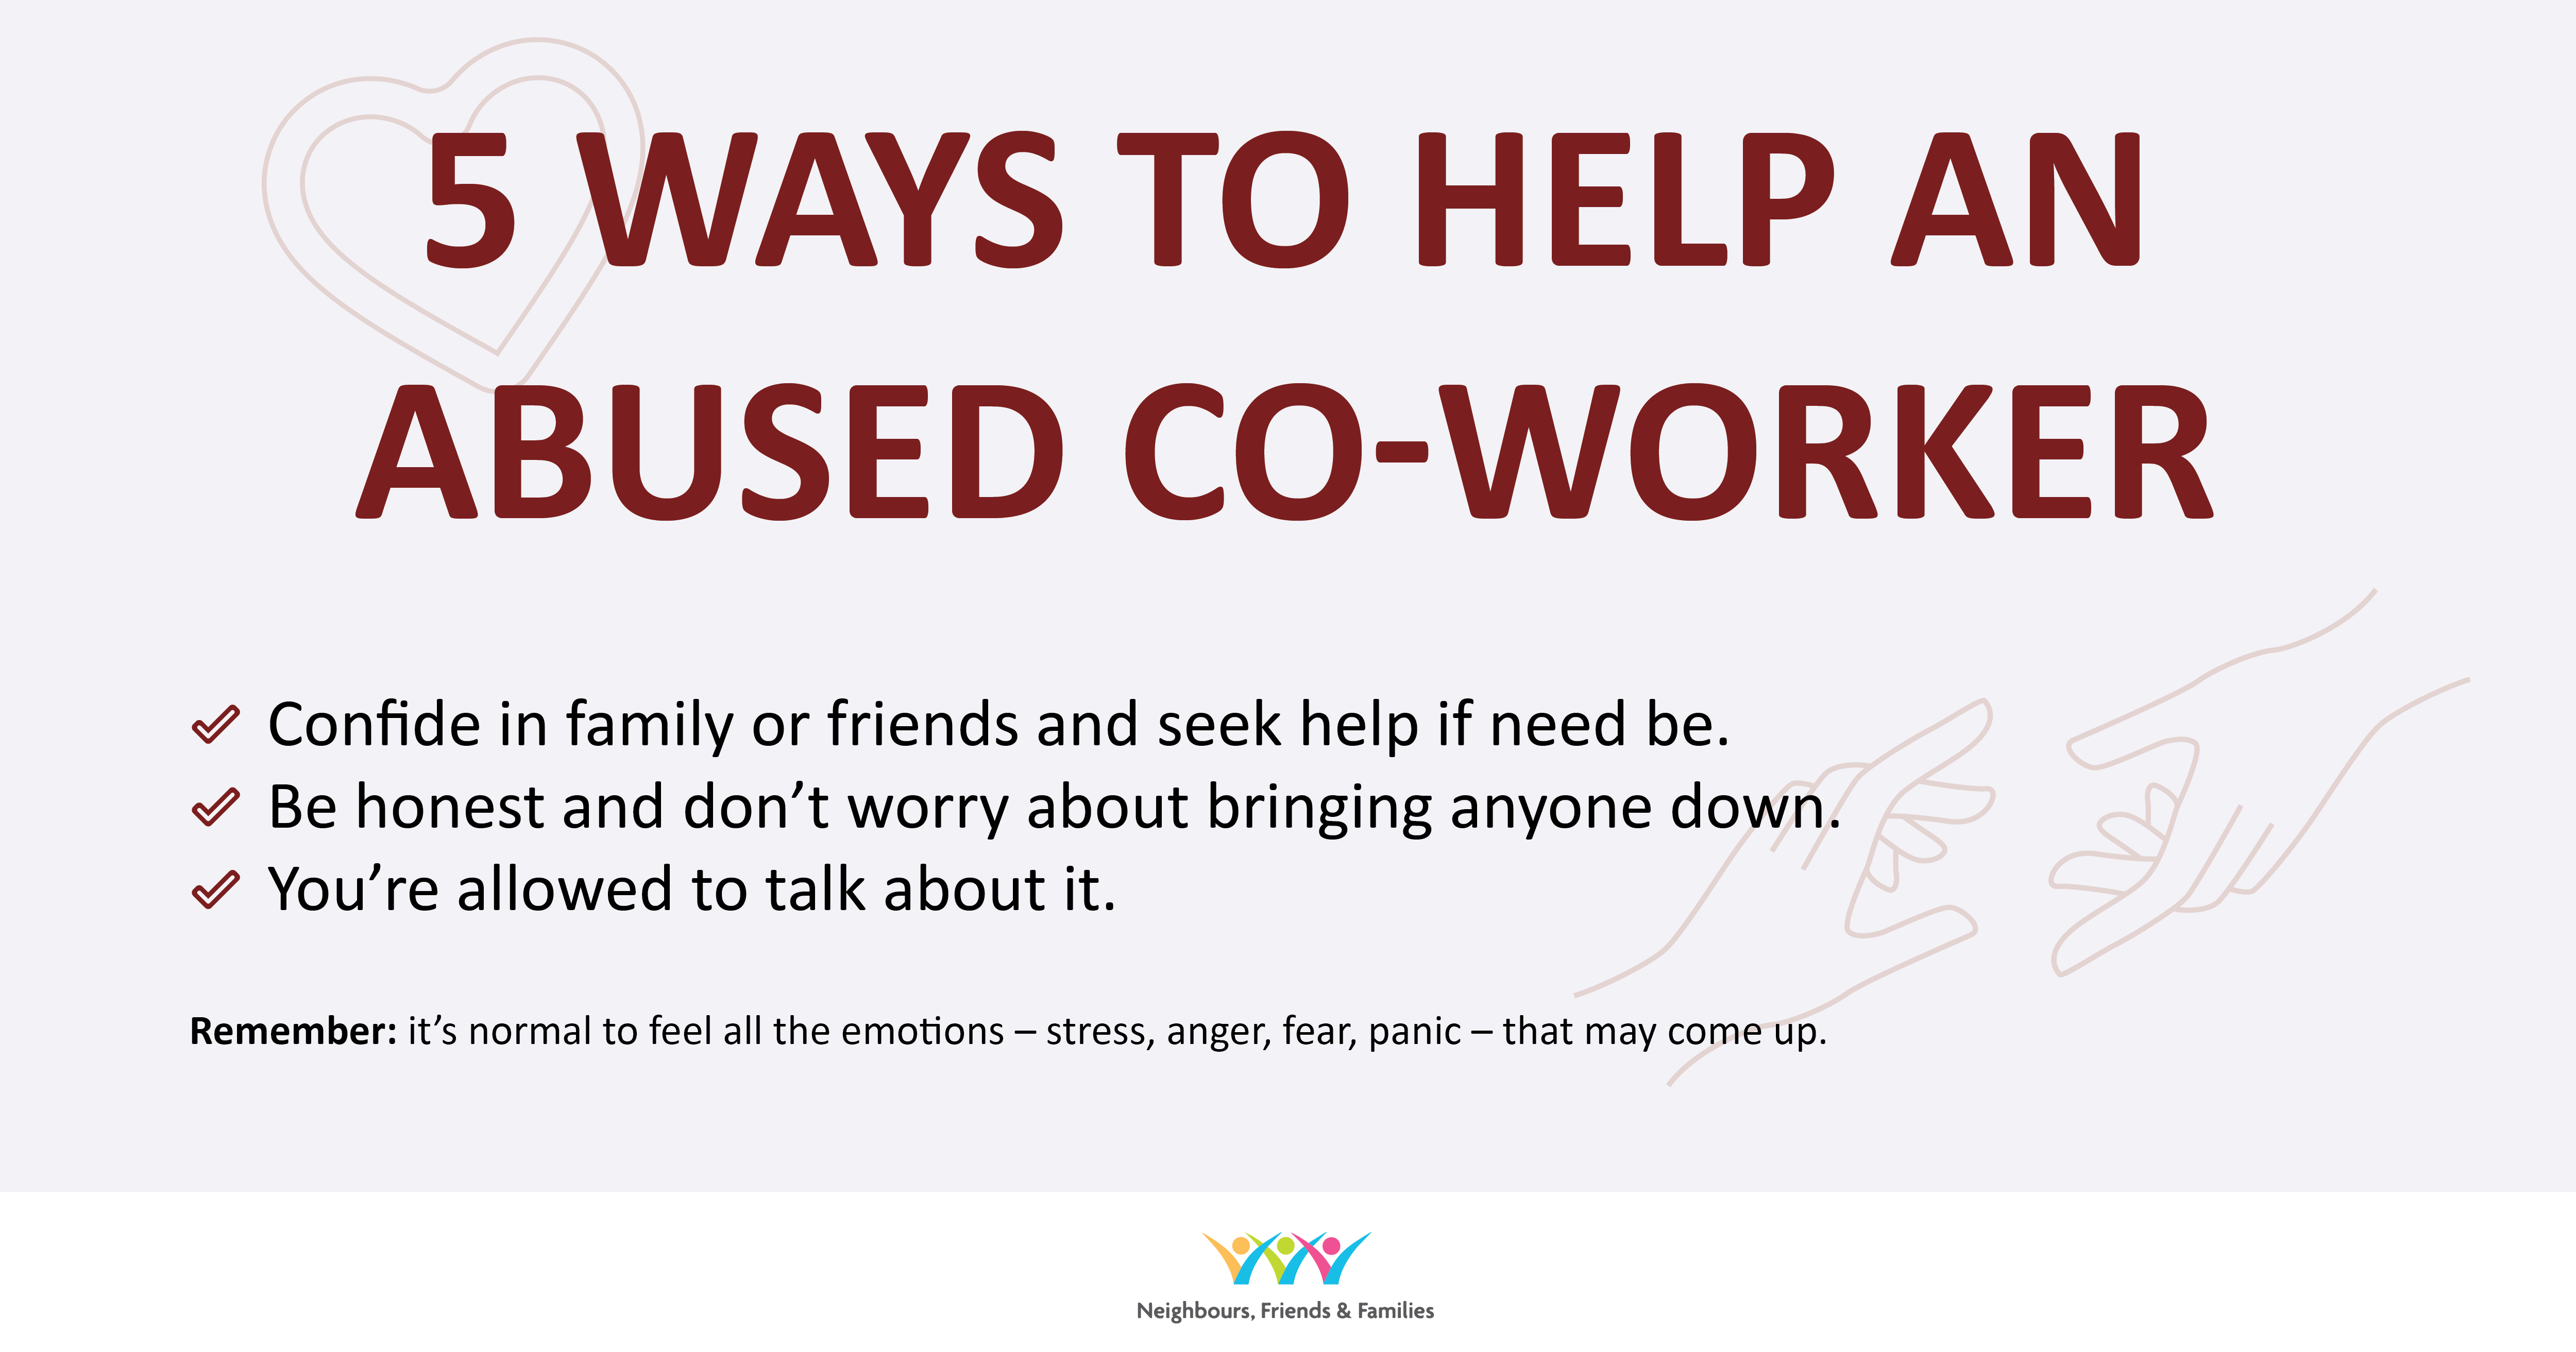 five ways to help an abused coworker infographic